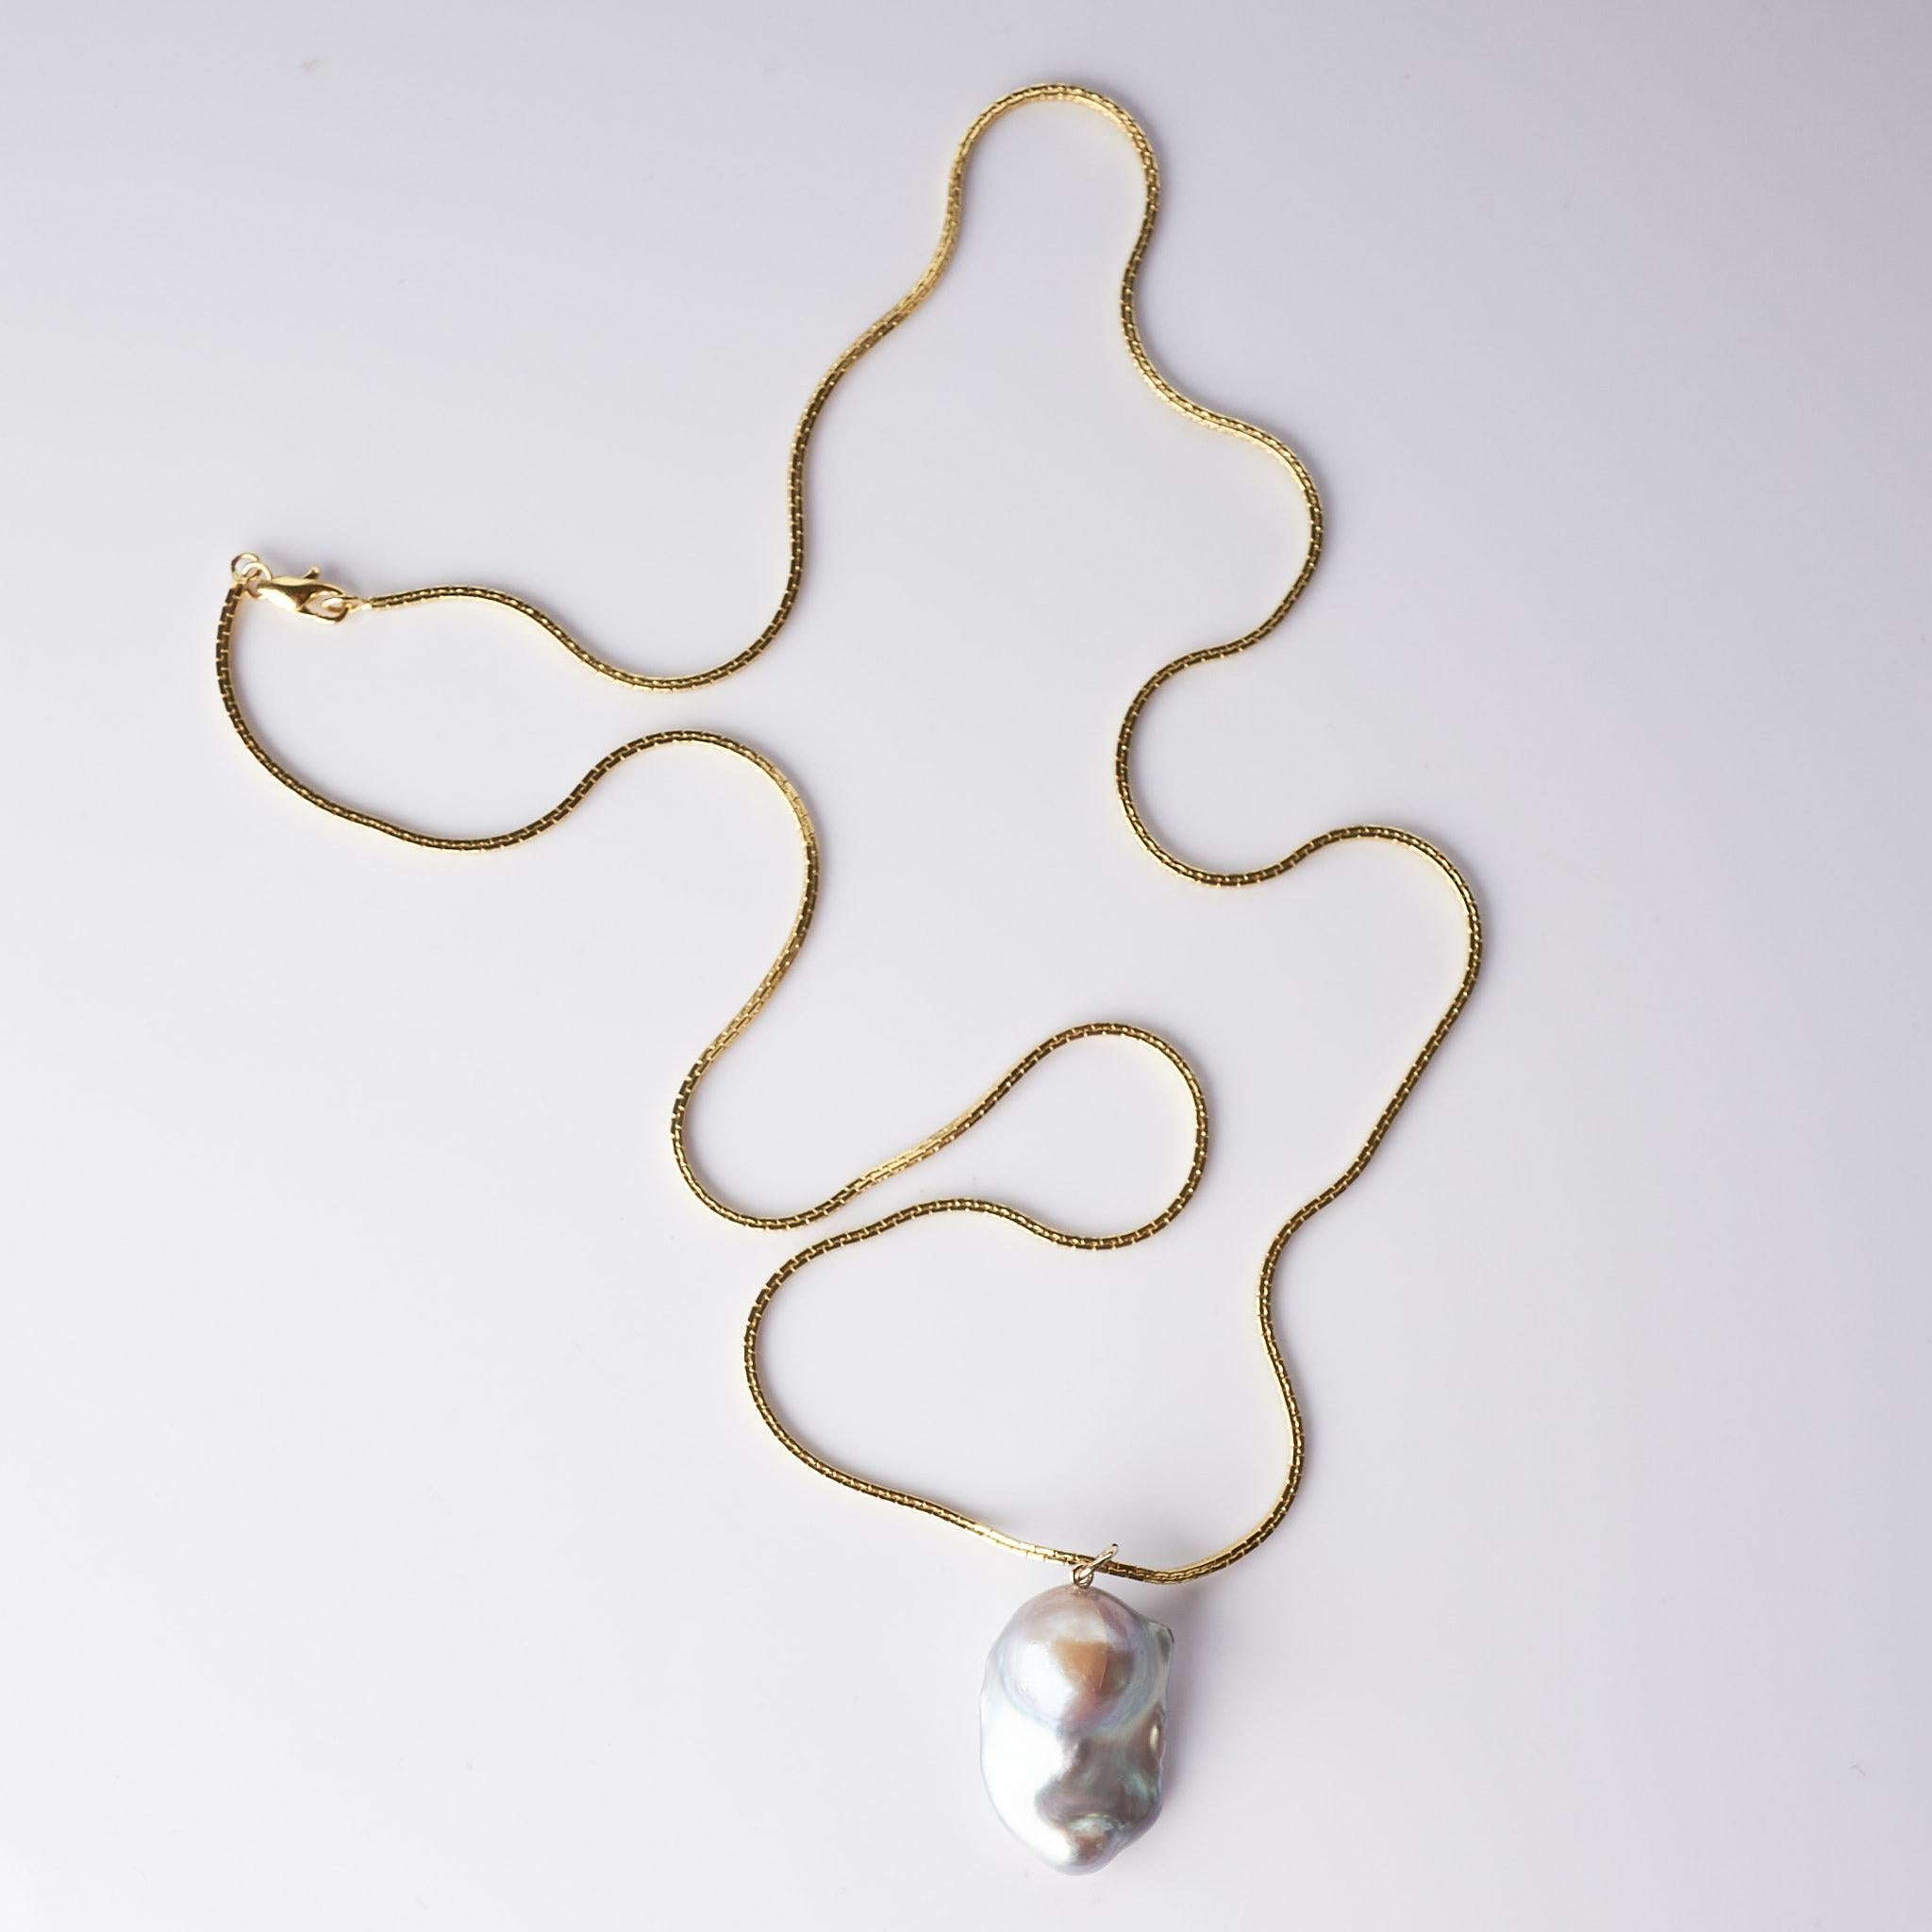 Pearl Chain Necklace Drop Pendant J Dauphin For Sale 4